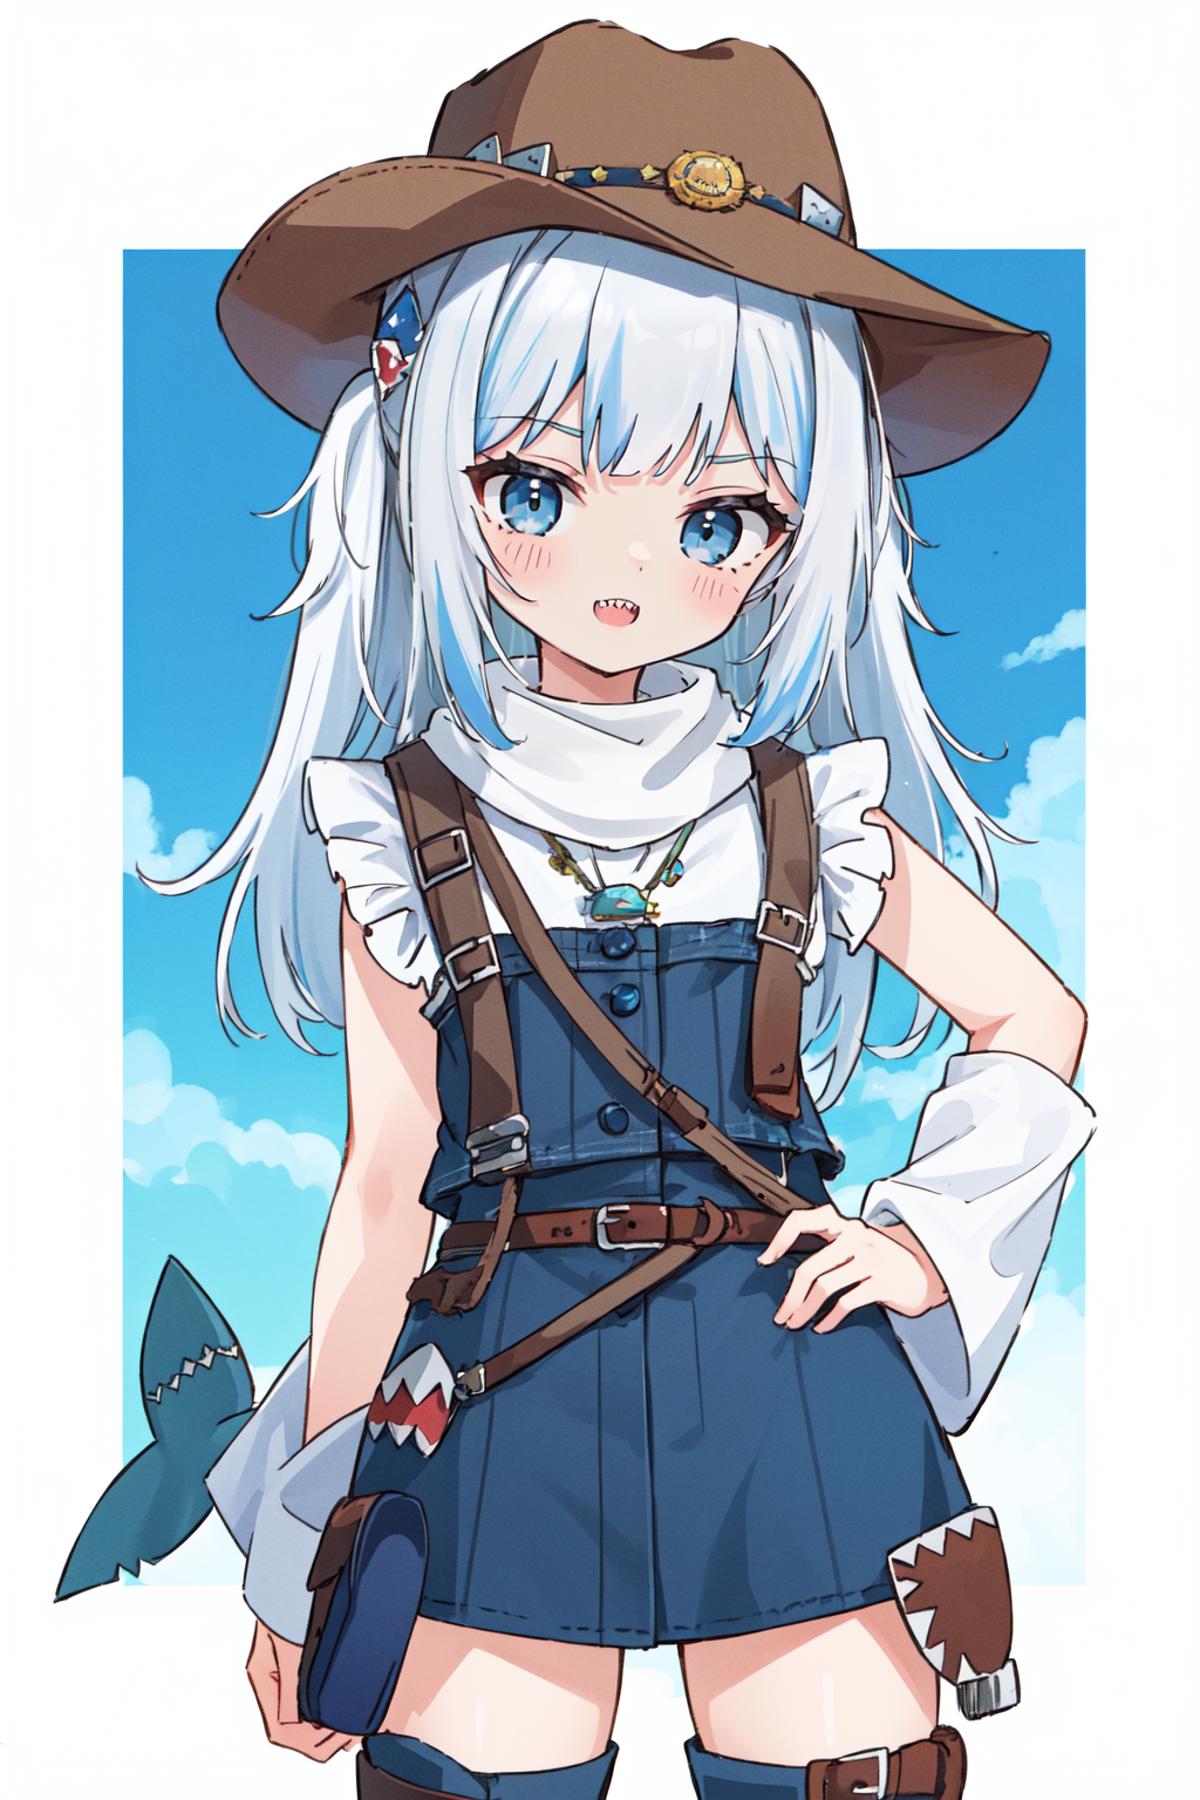 Cowgirl outfit image by PettankoPaizuri